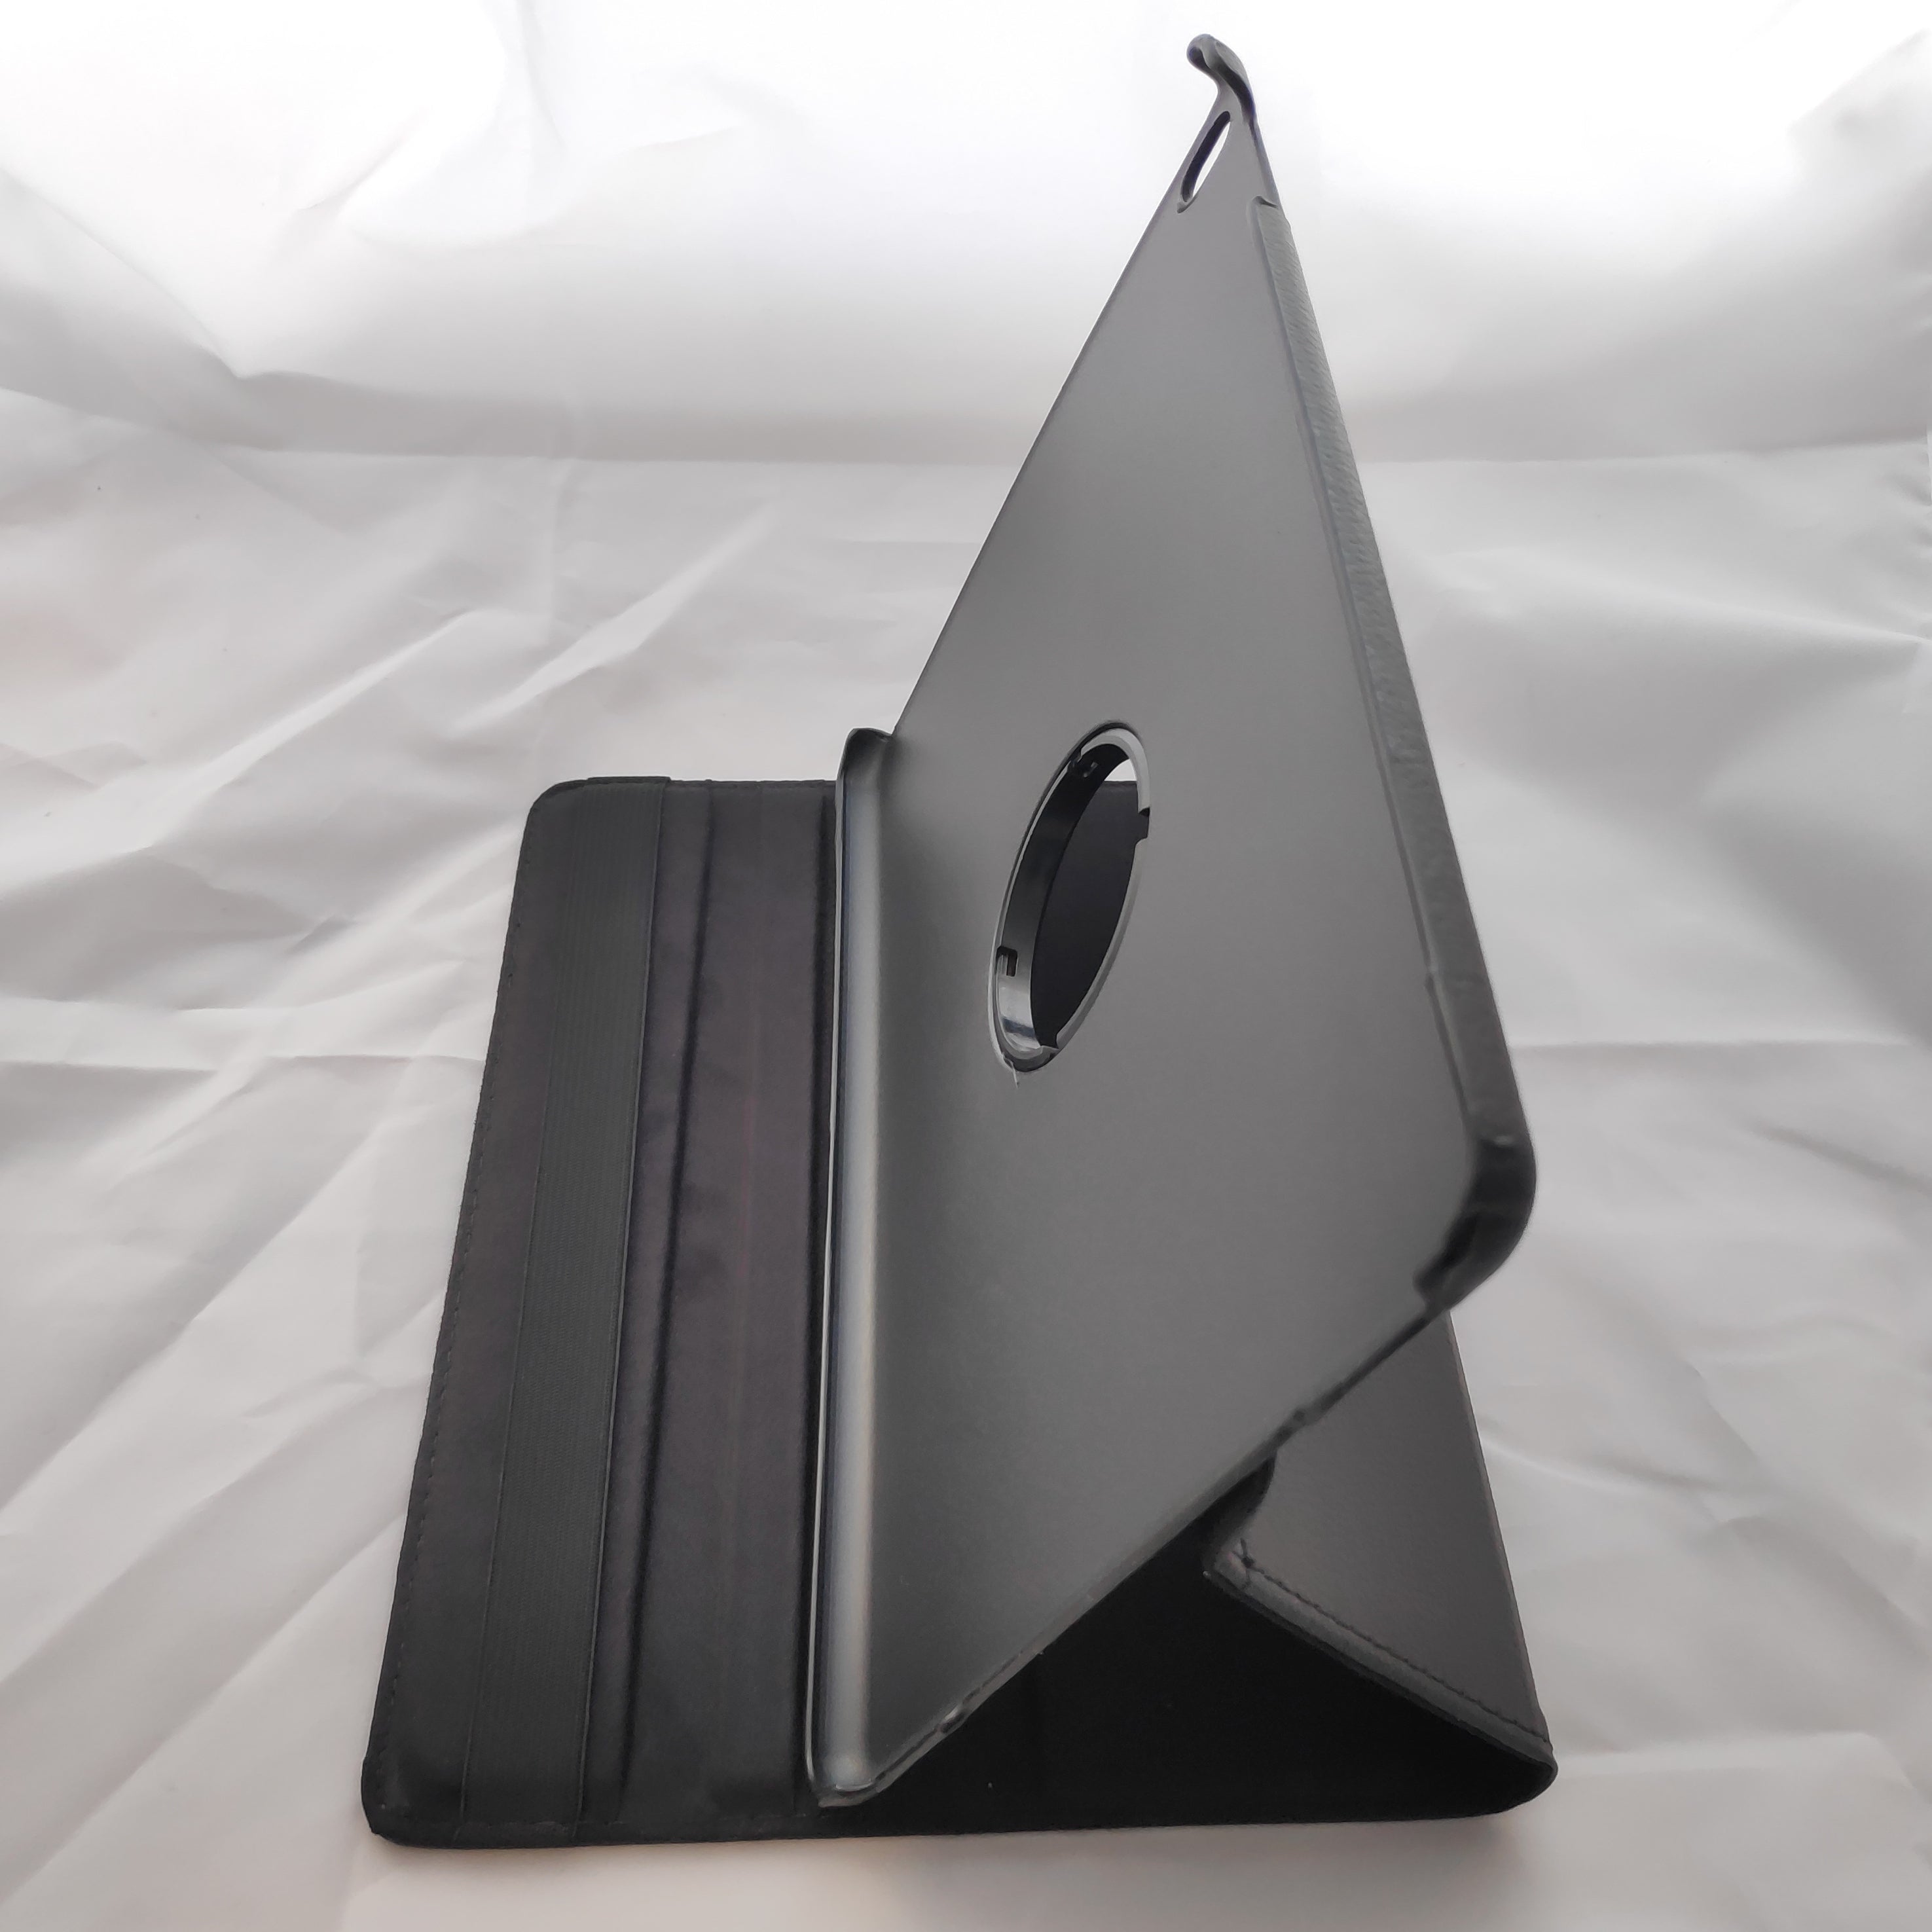 Apple iPad Air 1 16GB WiFi A1474 (Excellent) *Free Shipping, New Case & Glass Screen Protector*